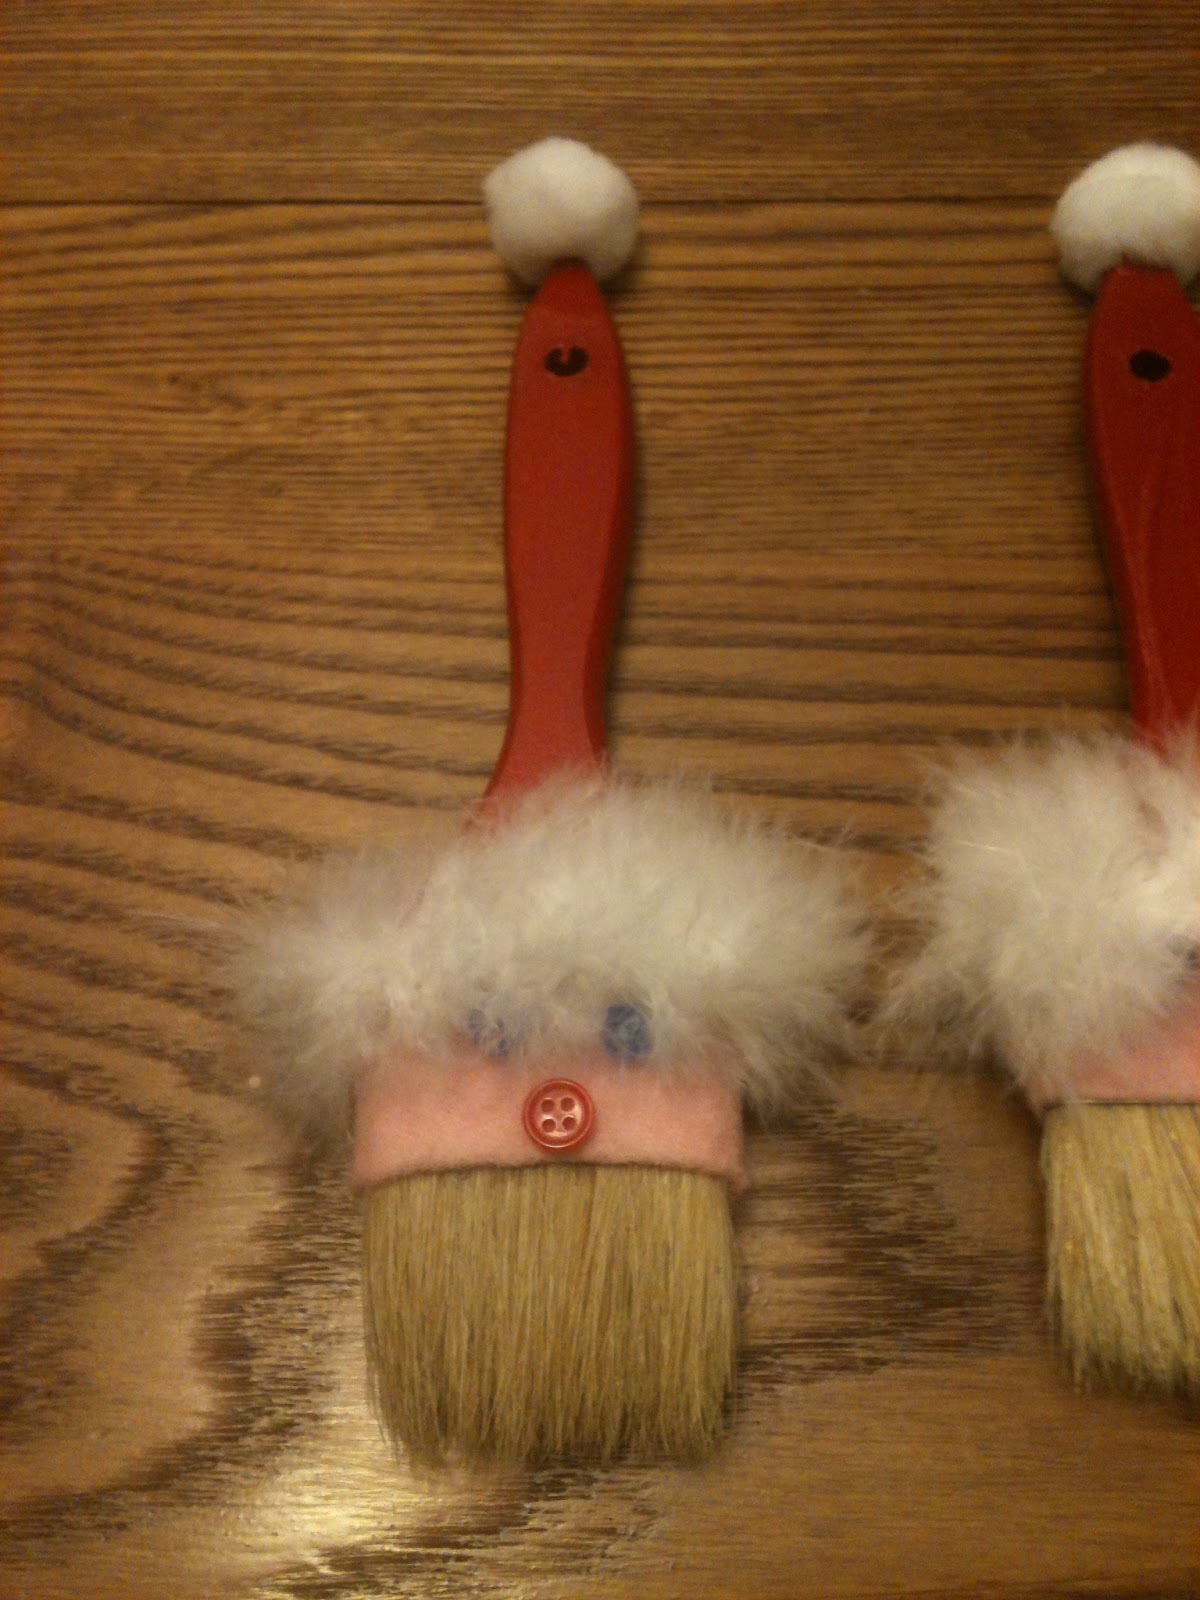 SANTA PAINTBRUSH ORNAMENTS | The Quilting Queen Online